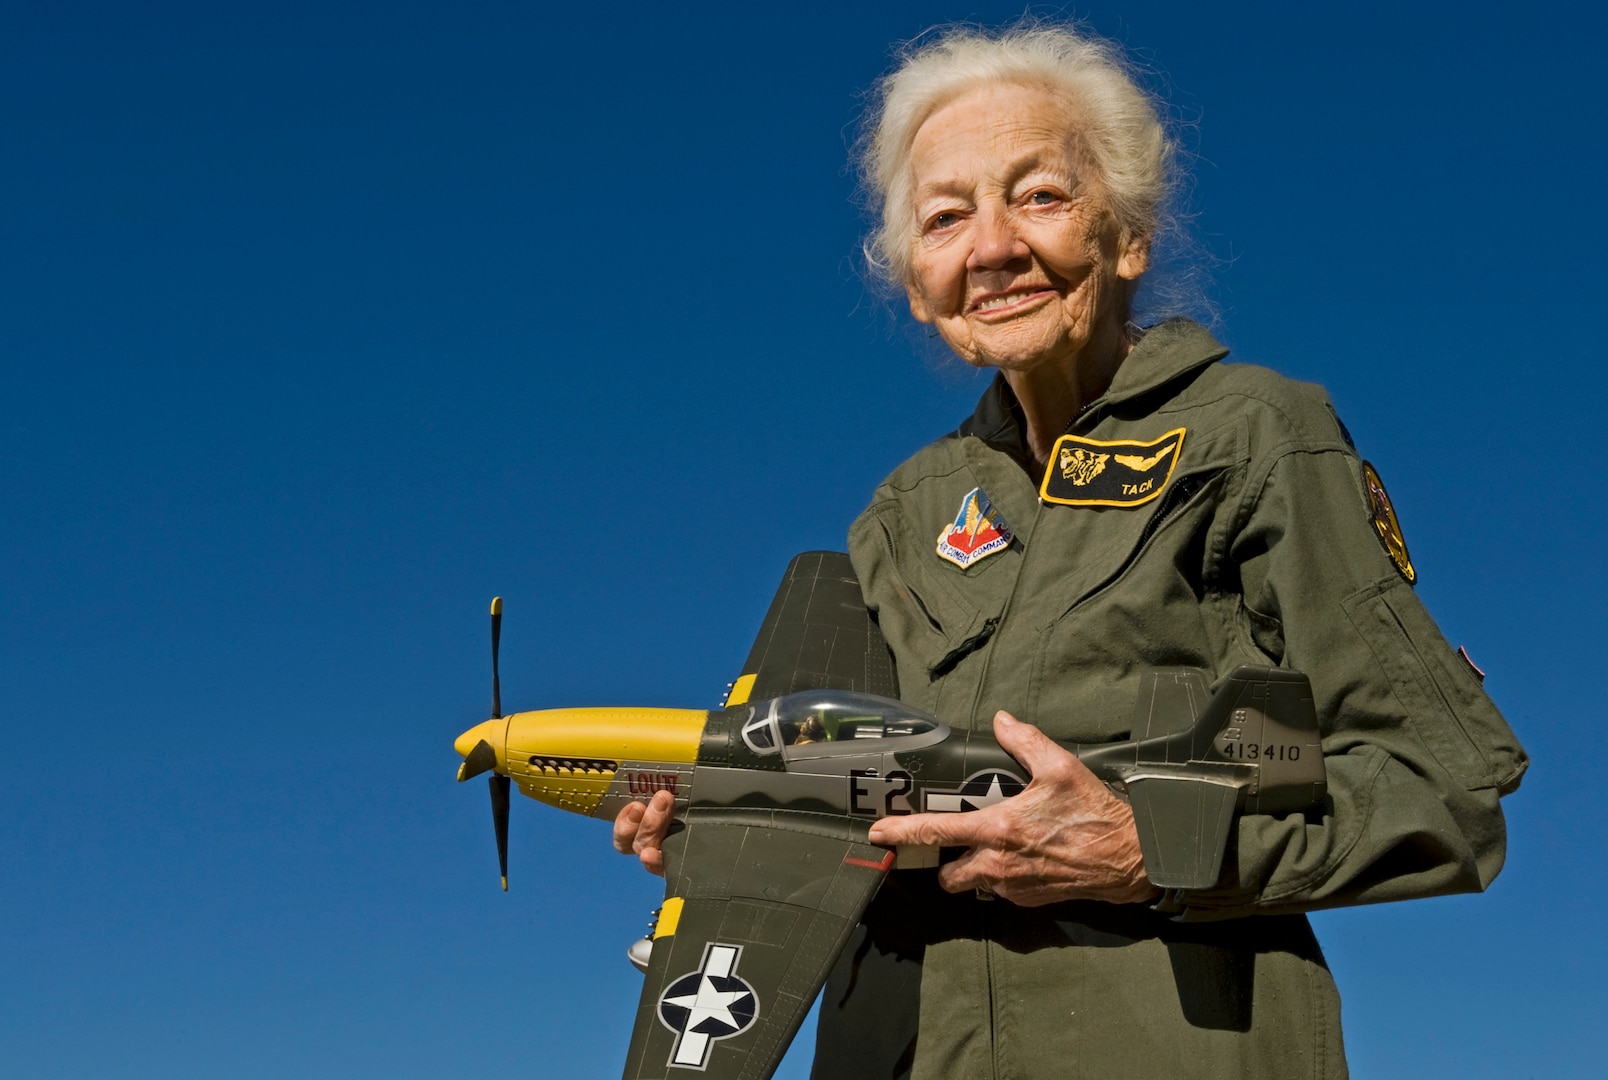 Betty "Tack" Blake, 91, holds a model of a P-51 Mustang, her favorite aircraft to fly, in front of her home in Scottsdale, Ariz. Blake joined the first class of WAFs (later named Women Airforce Service Pilots). During World War II, she was assigned as a transport pilot, ferrying 36 different types of aircraft across America.  (U.S. Air Force photo by Tech. Sgt. Bennie J. Davis III)